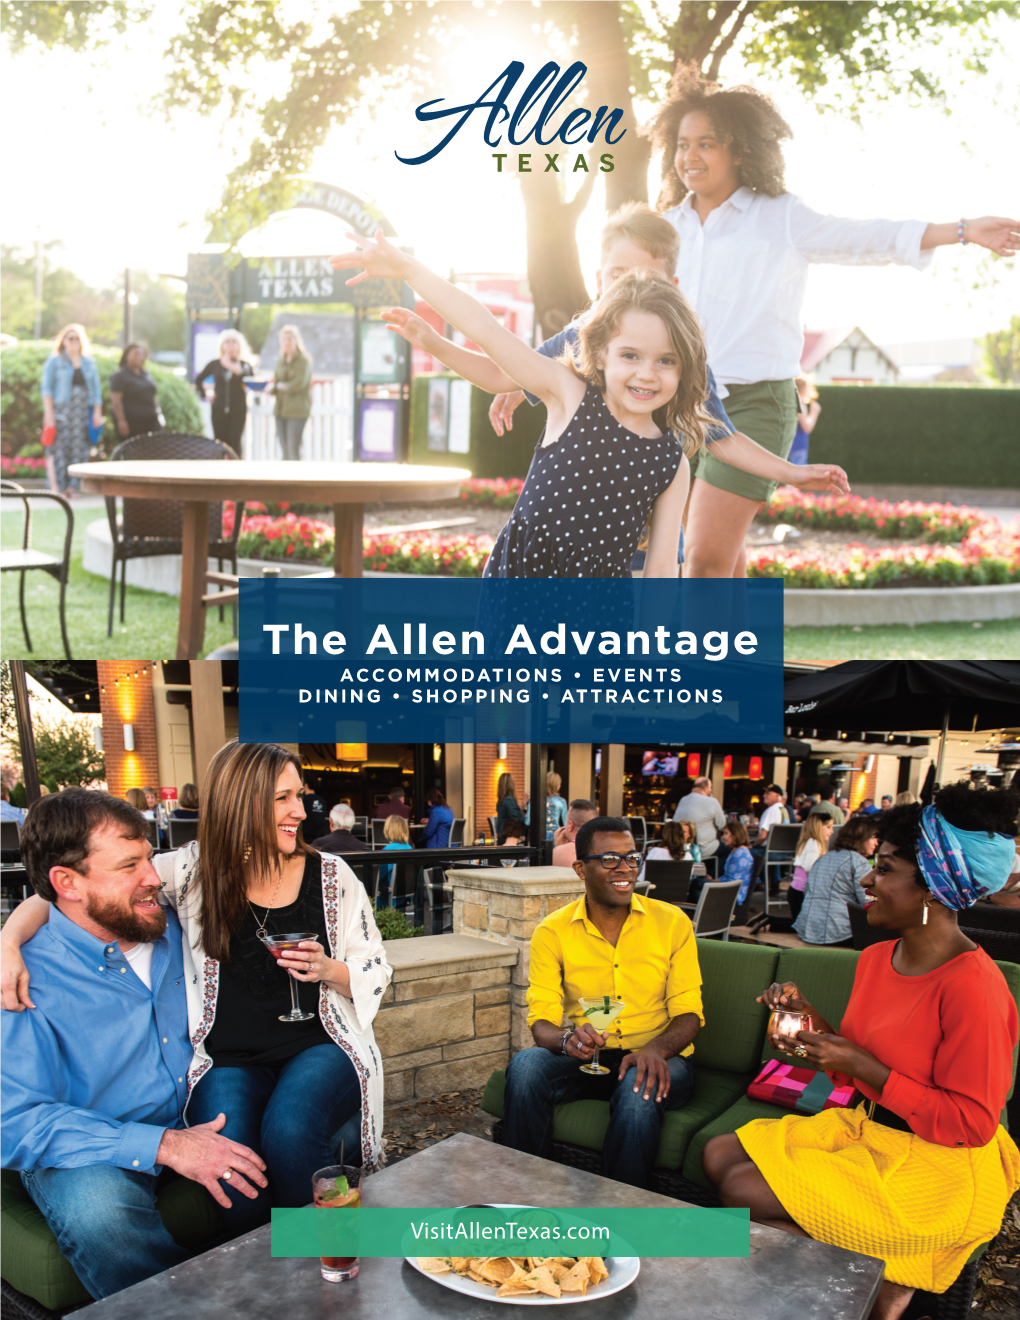 The Allen Advantage ACCOMMODATIONS • EVENTS DINING • SHOPPING • ATTRACTIONS